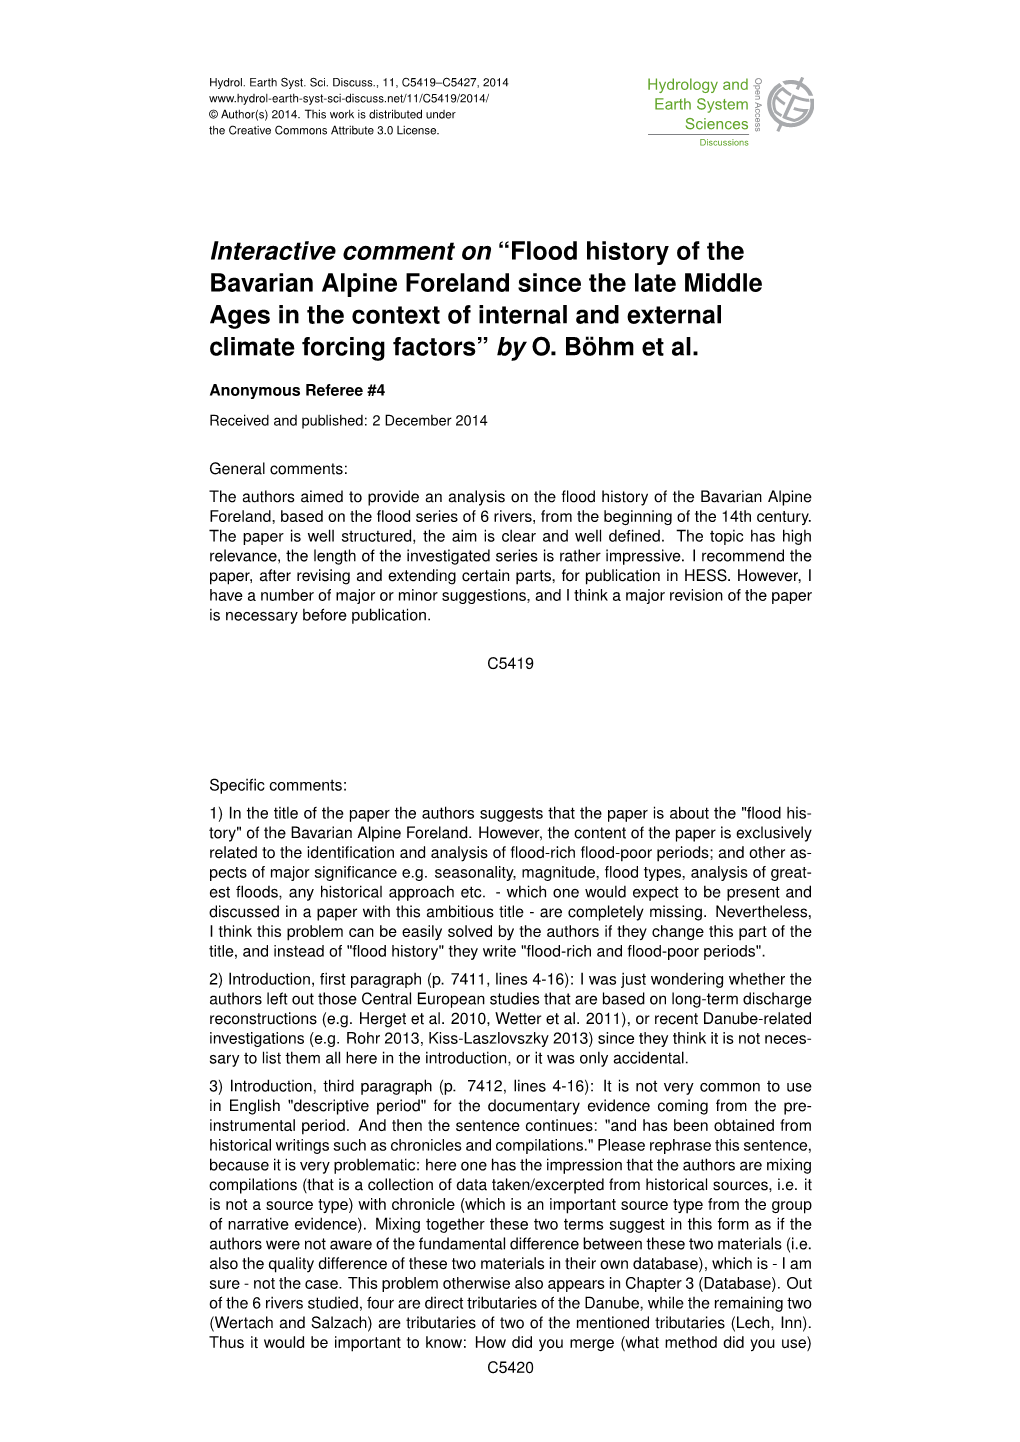 Flood History of the Bavarian Alpine Foreland Since the Late Middle Ages in the Context of Internal and External Climate Forcing Factors” by O